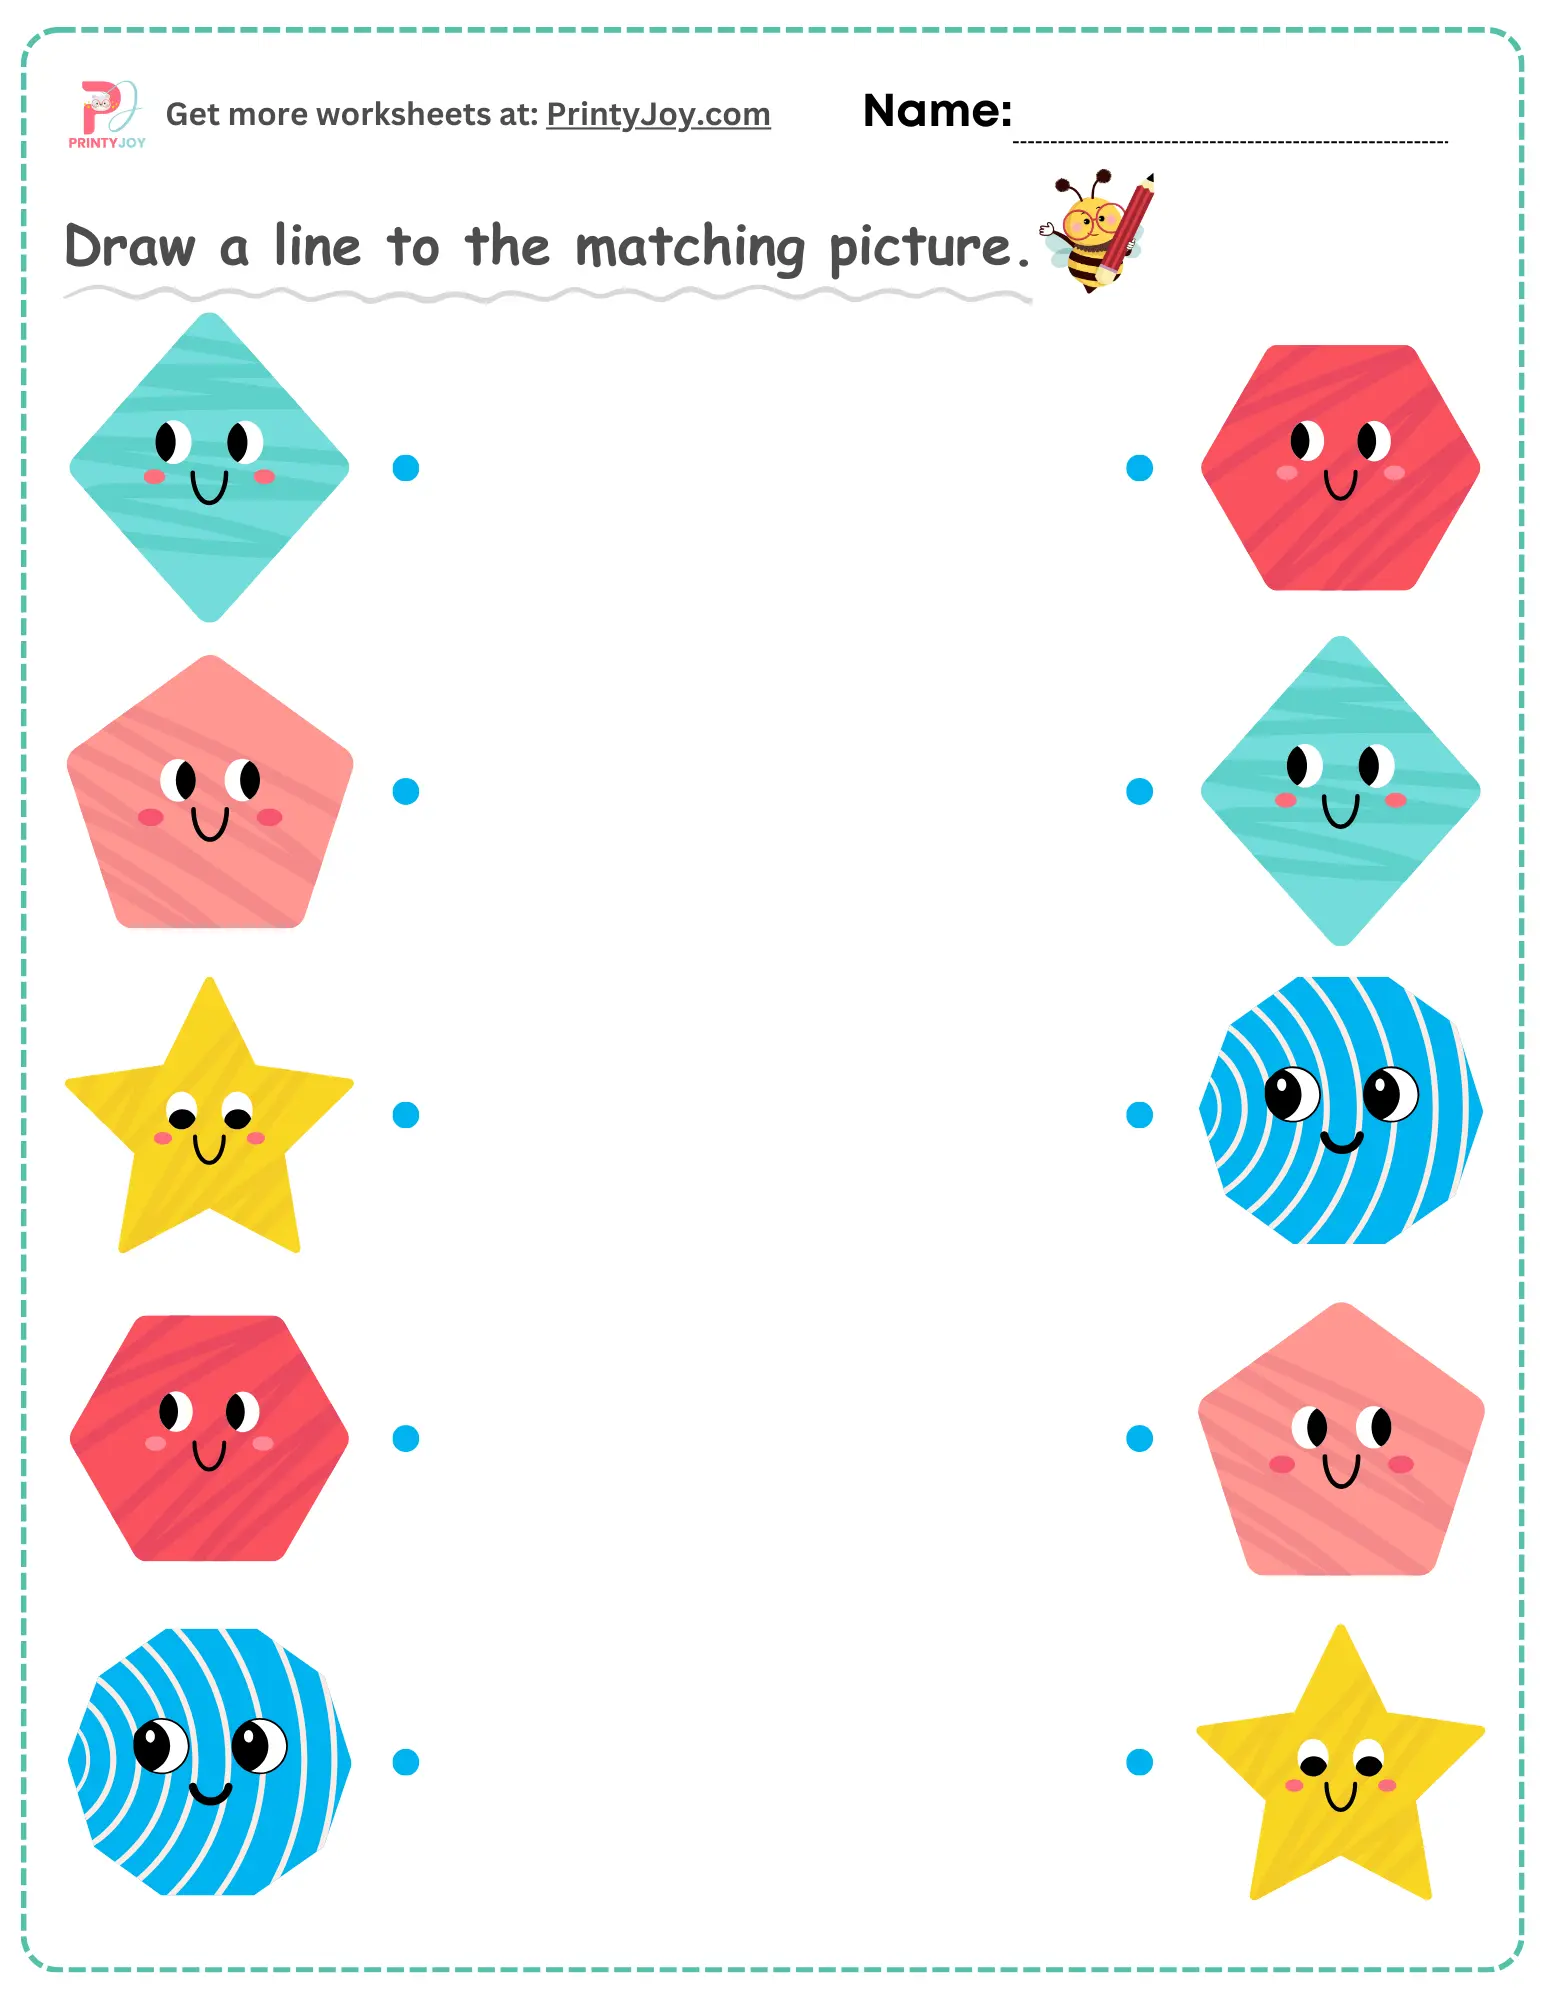 shapes matching worksheets for kids free download